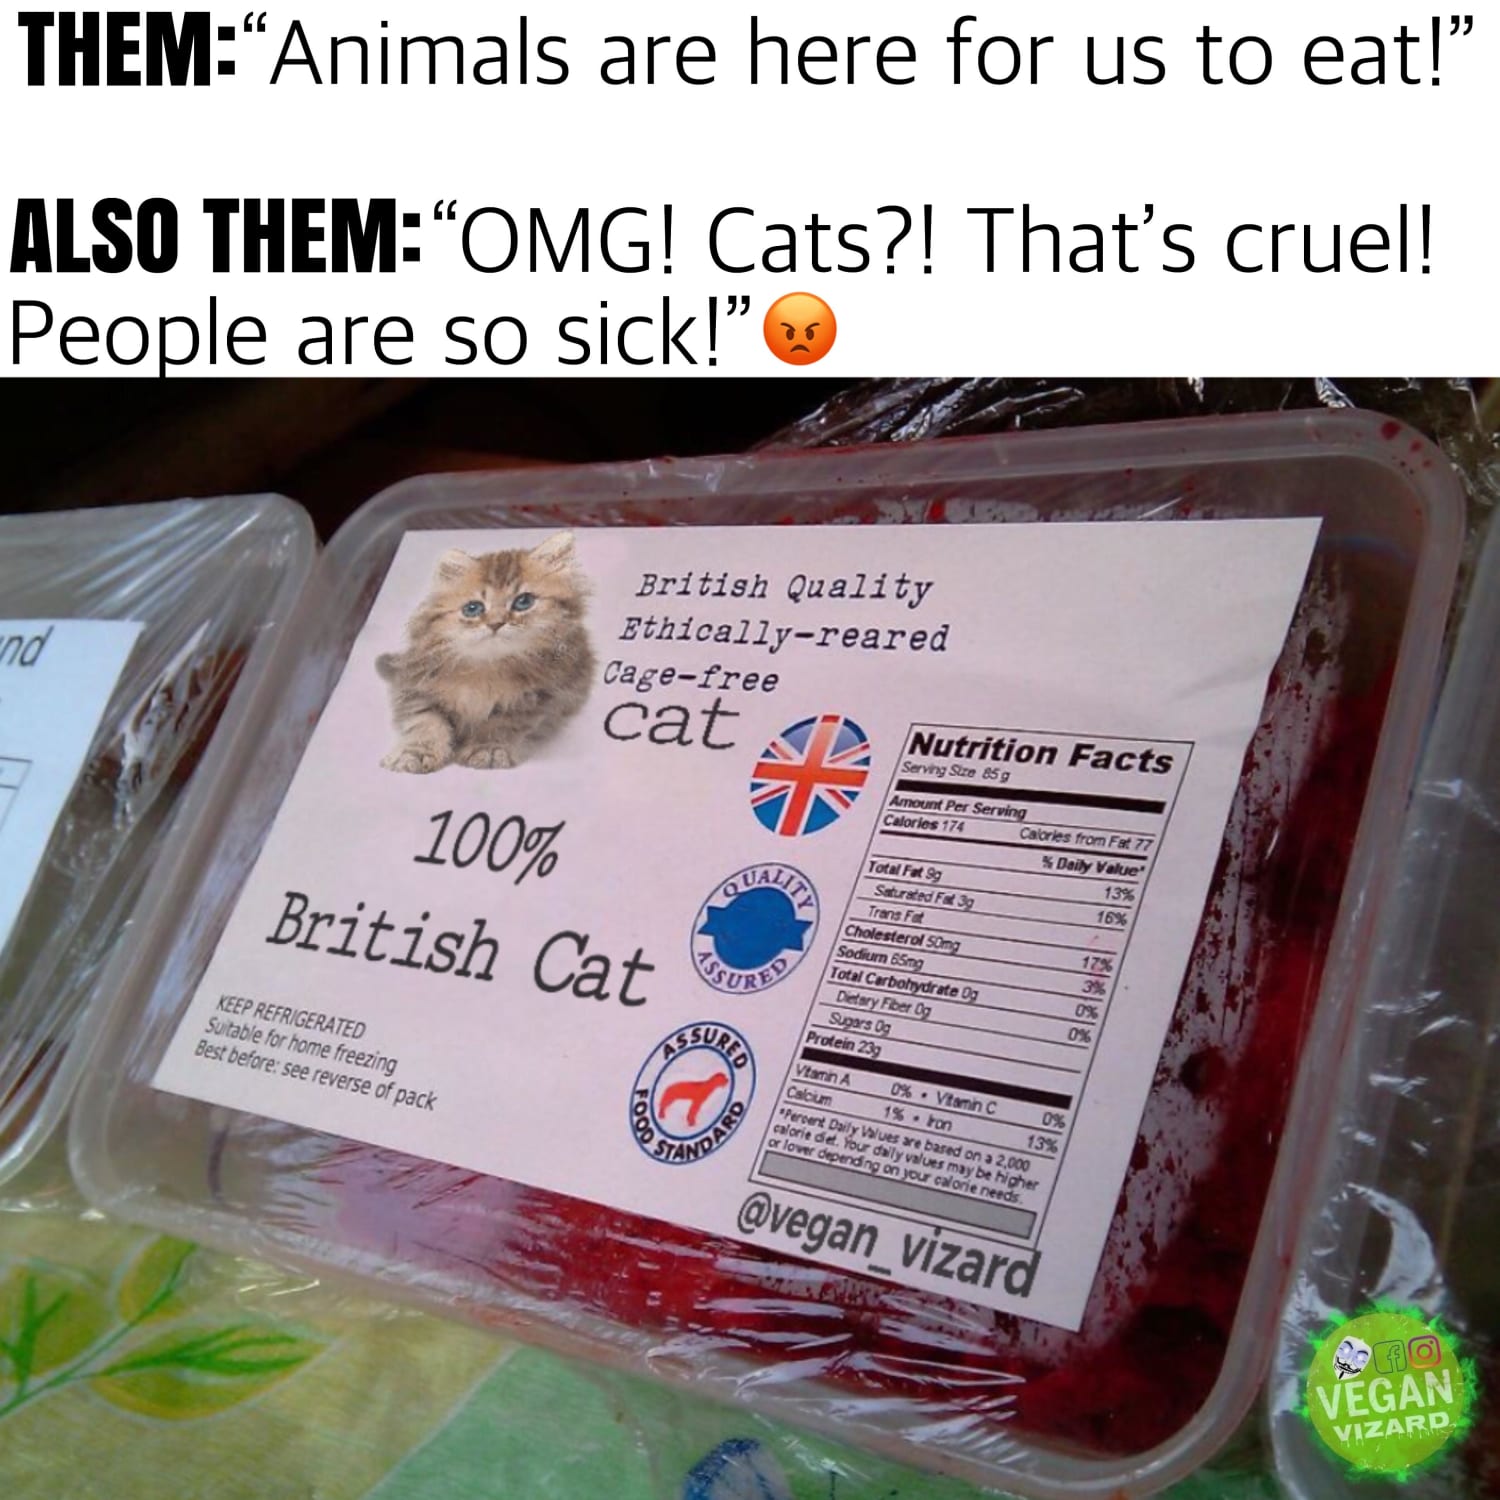 "Animals are here for us to eat!"